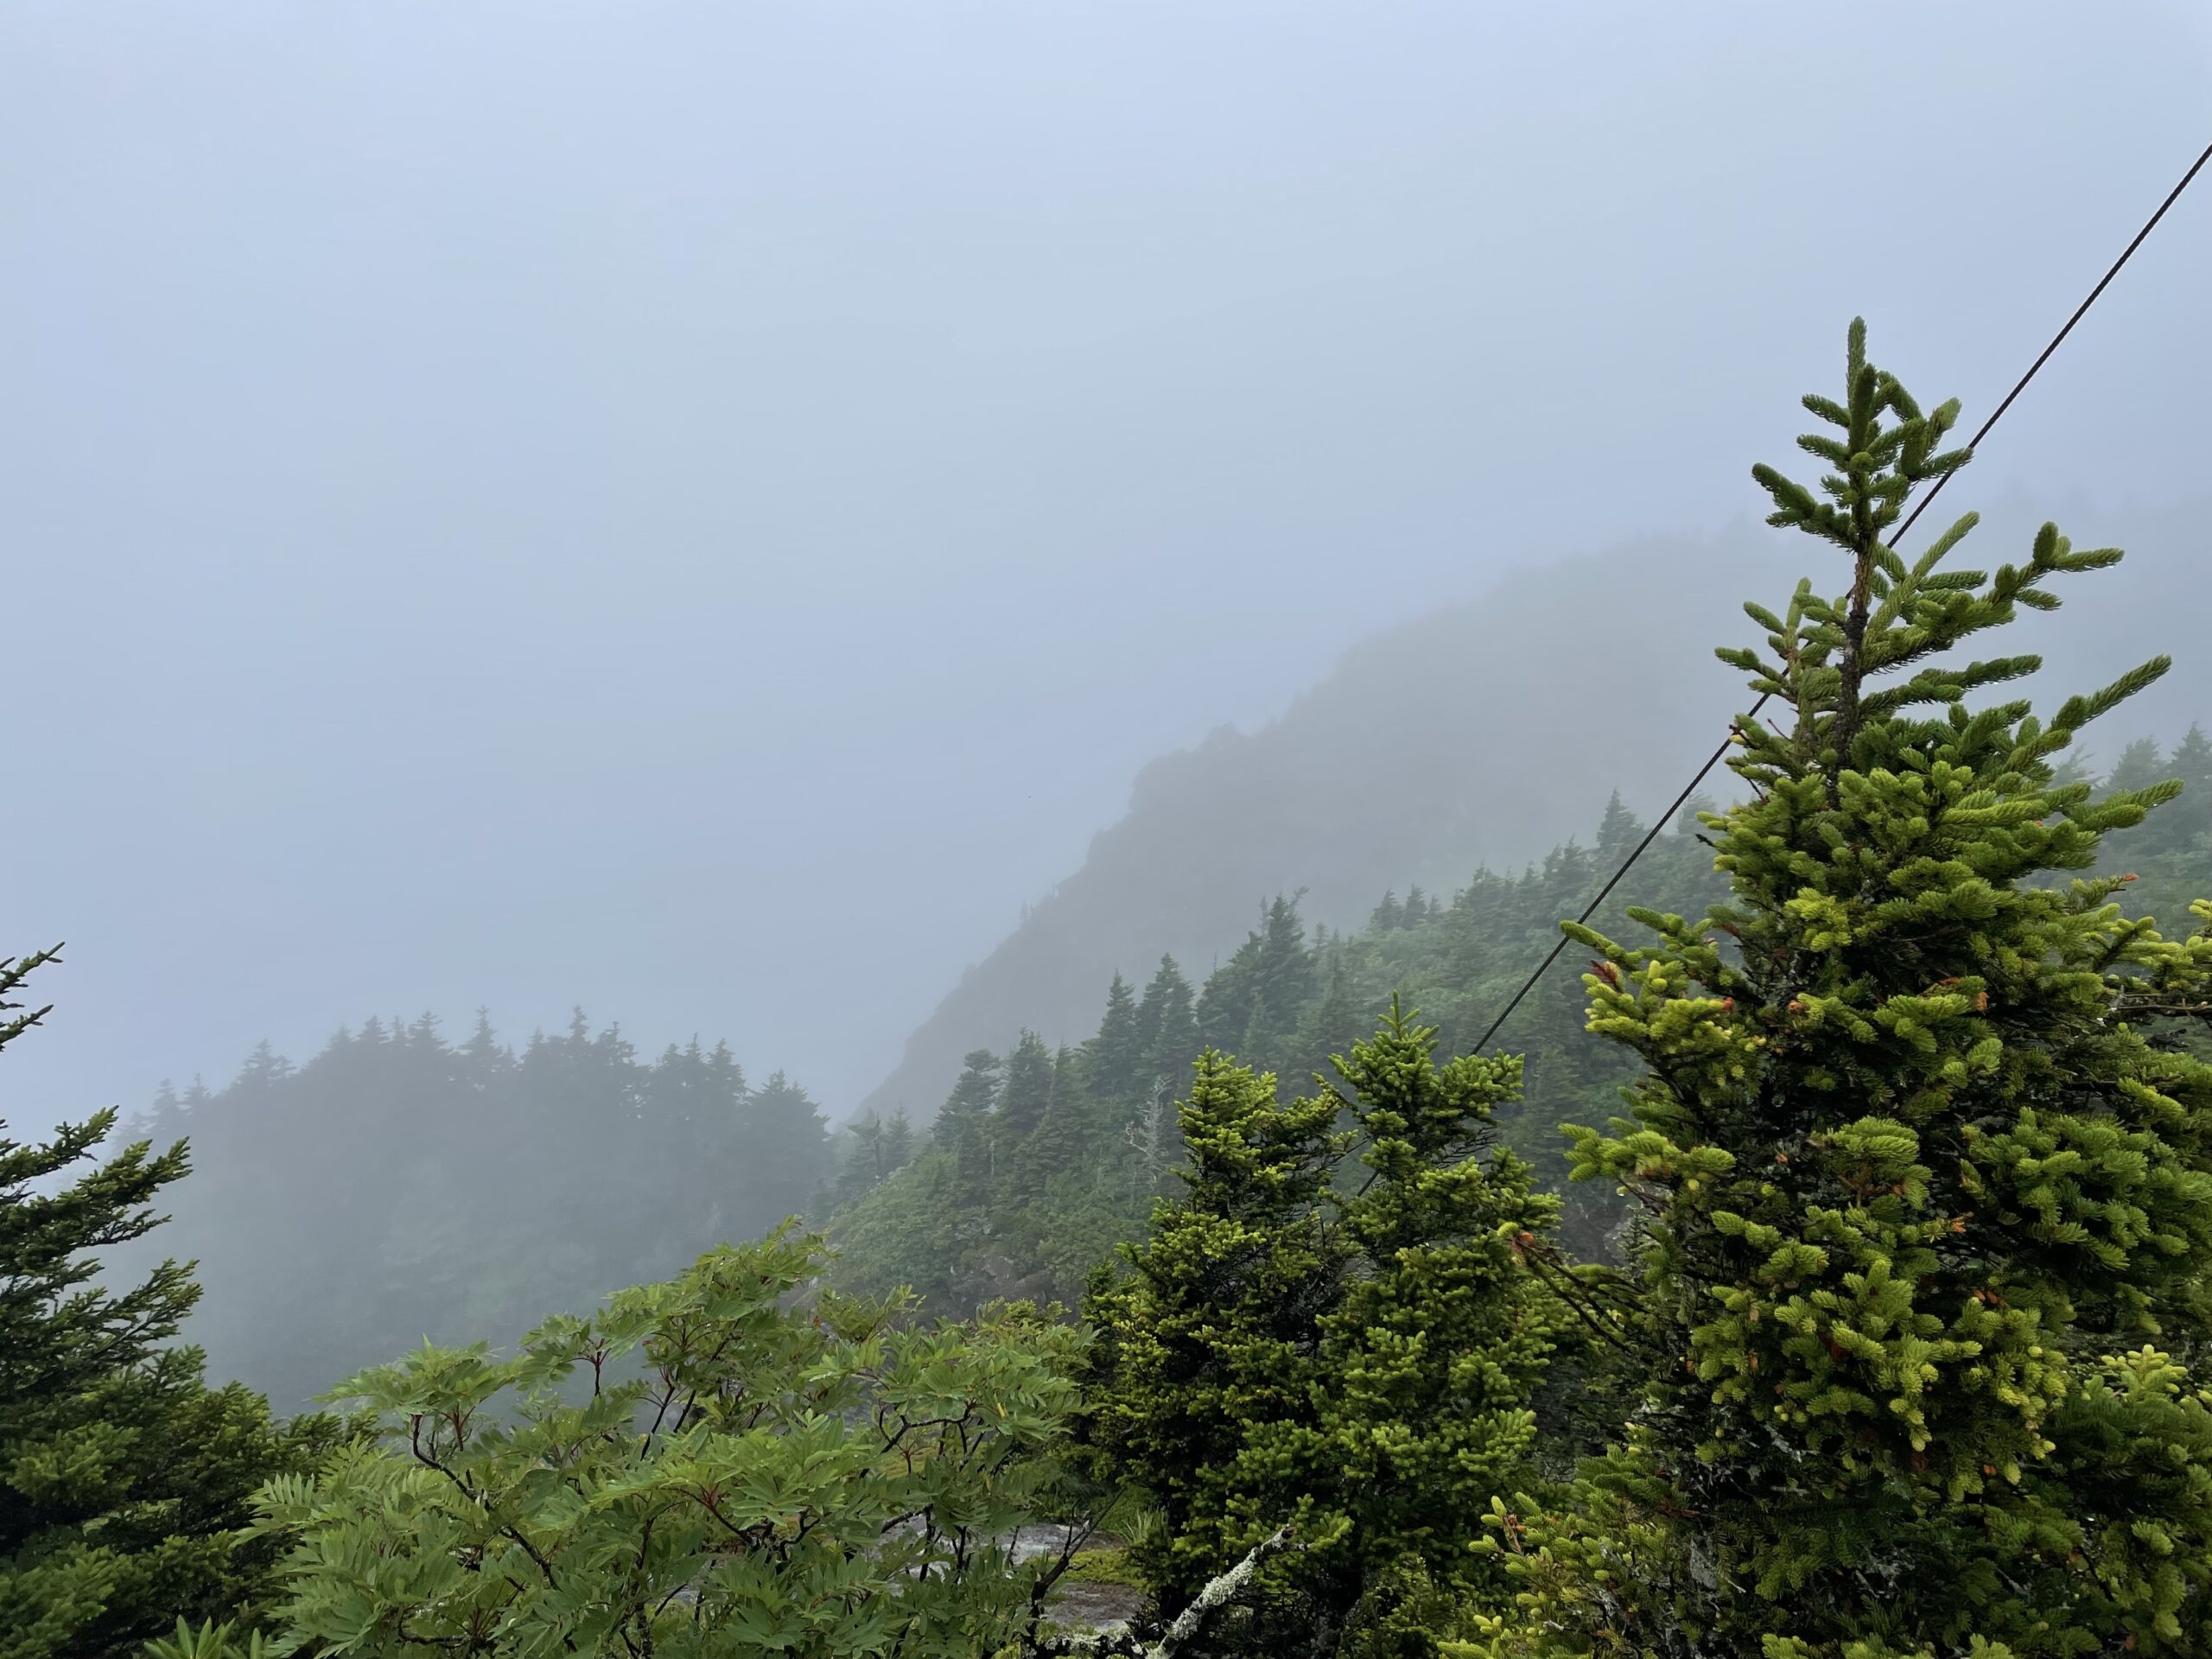 Grandfather mountain and forest